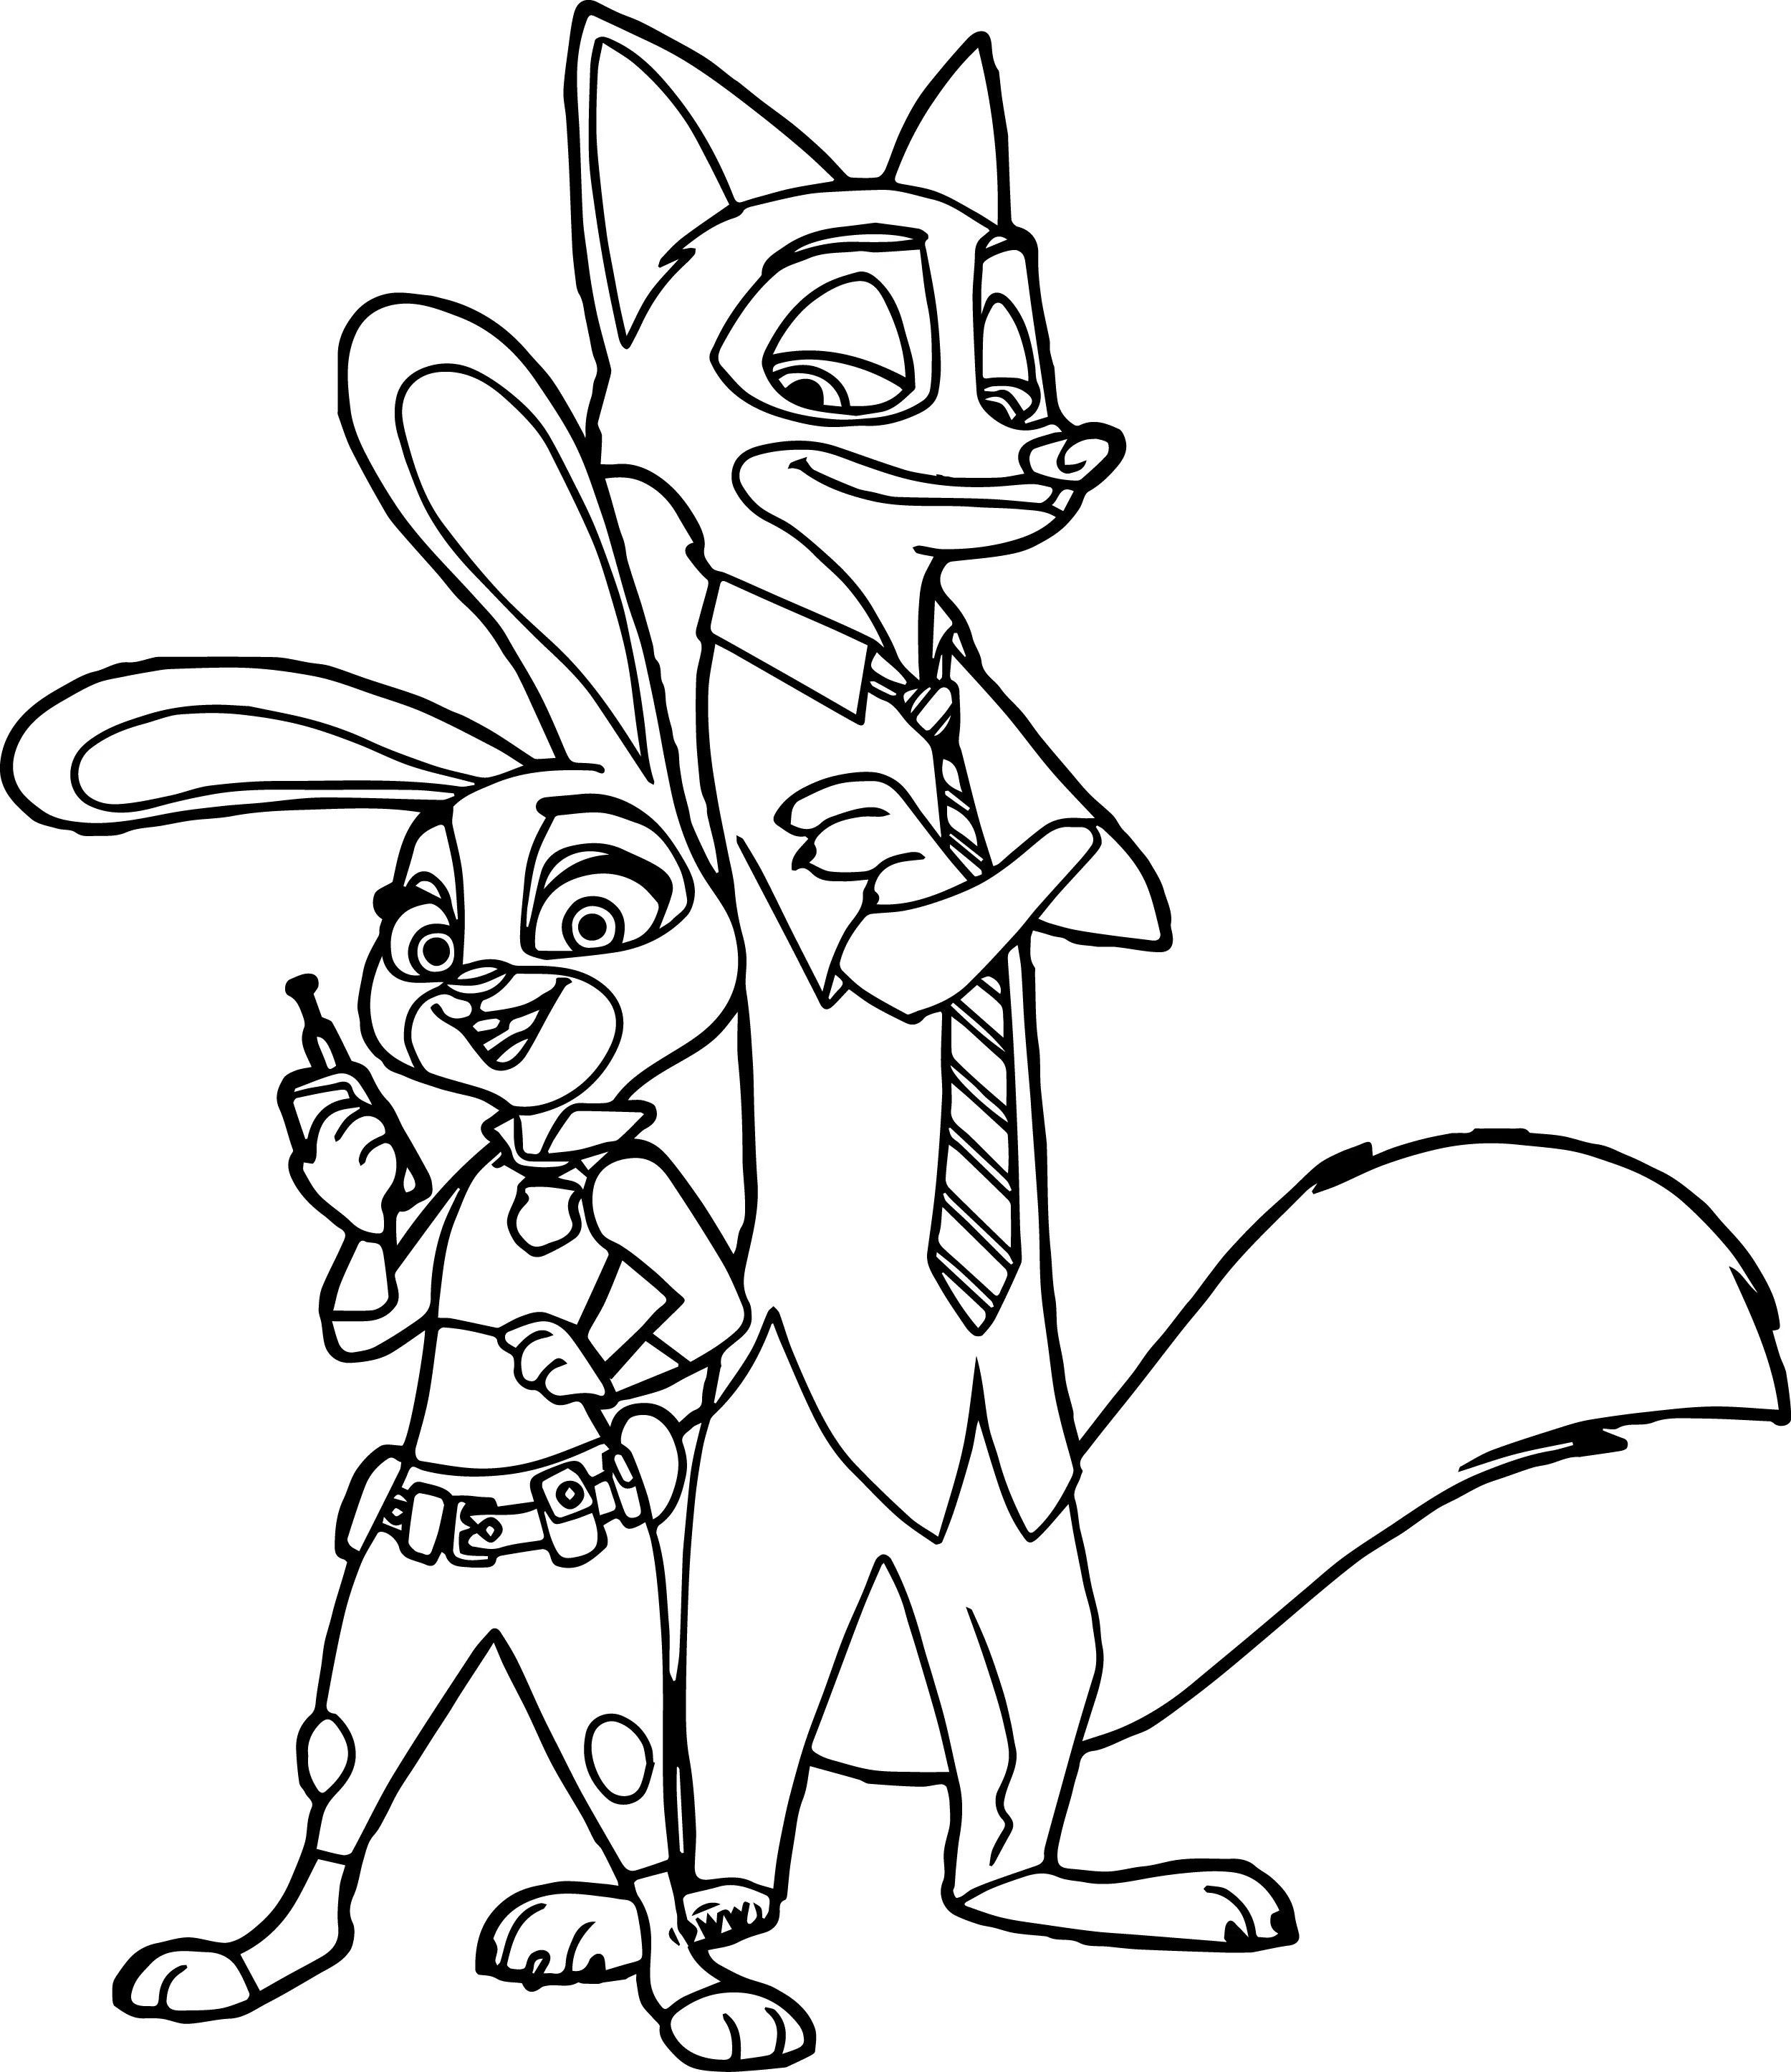 Zootopia Coloring Pages Free at GetColorings.com | Free printable